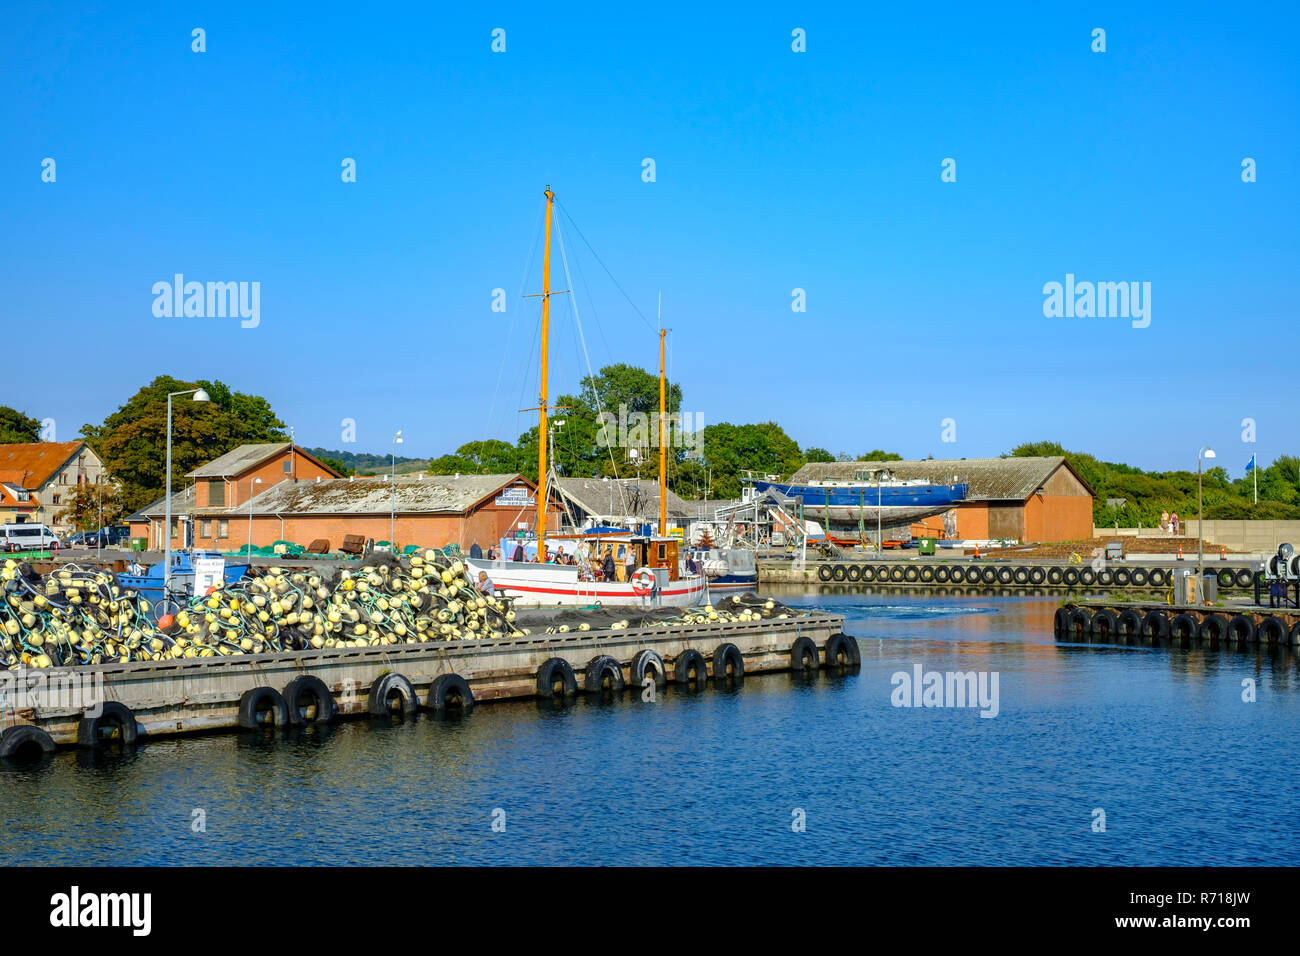 Klintholm Havn, Denmark - August 16, 2018: The DISCOVERY sailing cutter approaches the port of Klinholm Havn after an excursion with tourists. Stock Photo